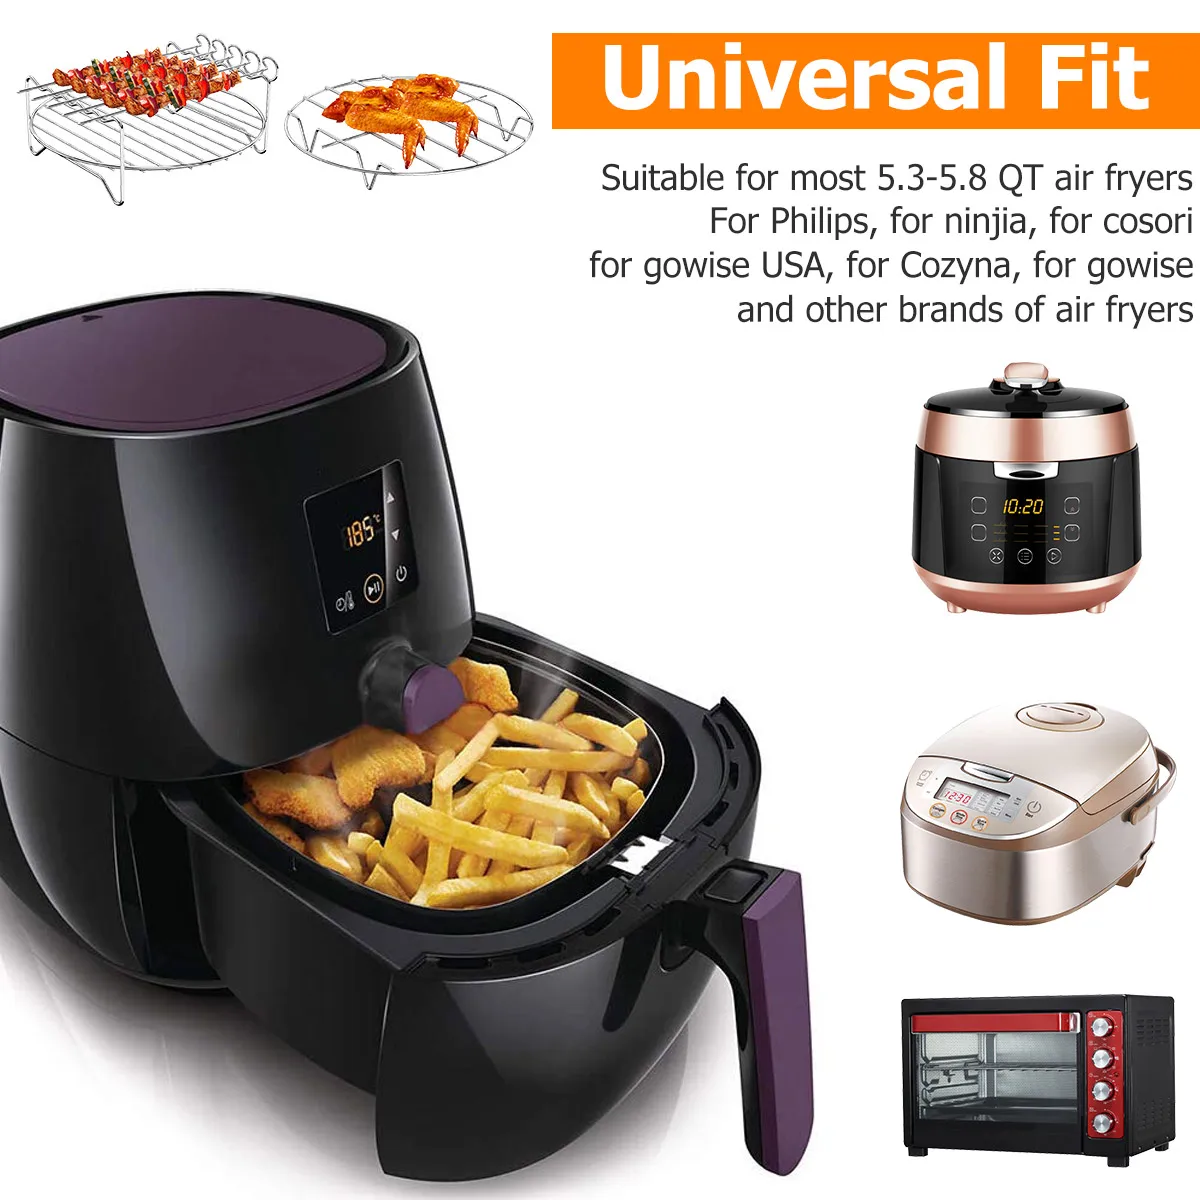 8pcs/set 7 Inch / 8 Inch Air Fryer Accessories for Gowise Phillips Cozyna  and Secura Fit all Airfryer 3.7 4.2 5.3 5.8QT